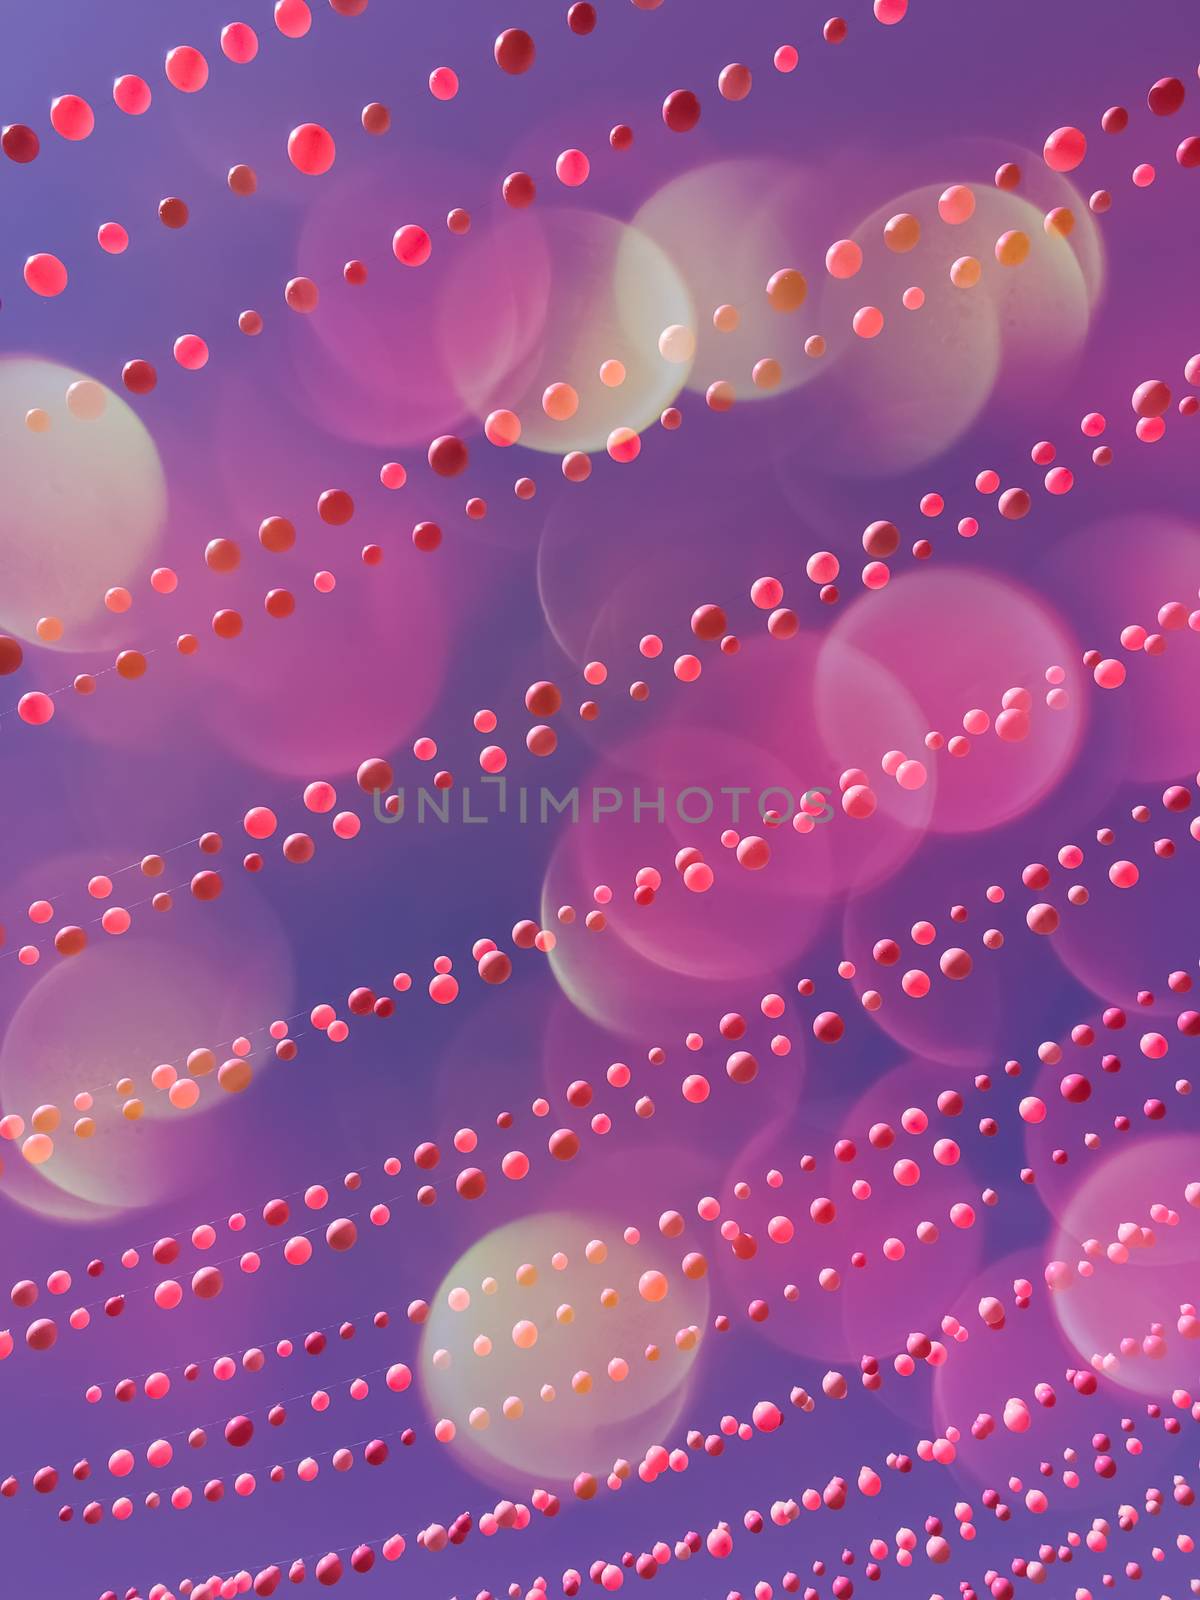 Sky background with balloon decorations and purple bokeh lights by anikasalsera